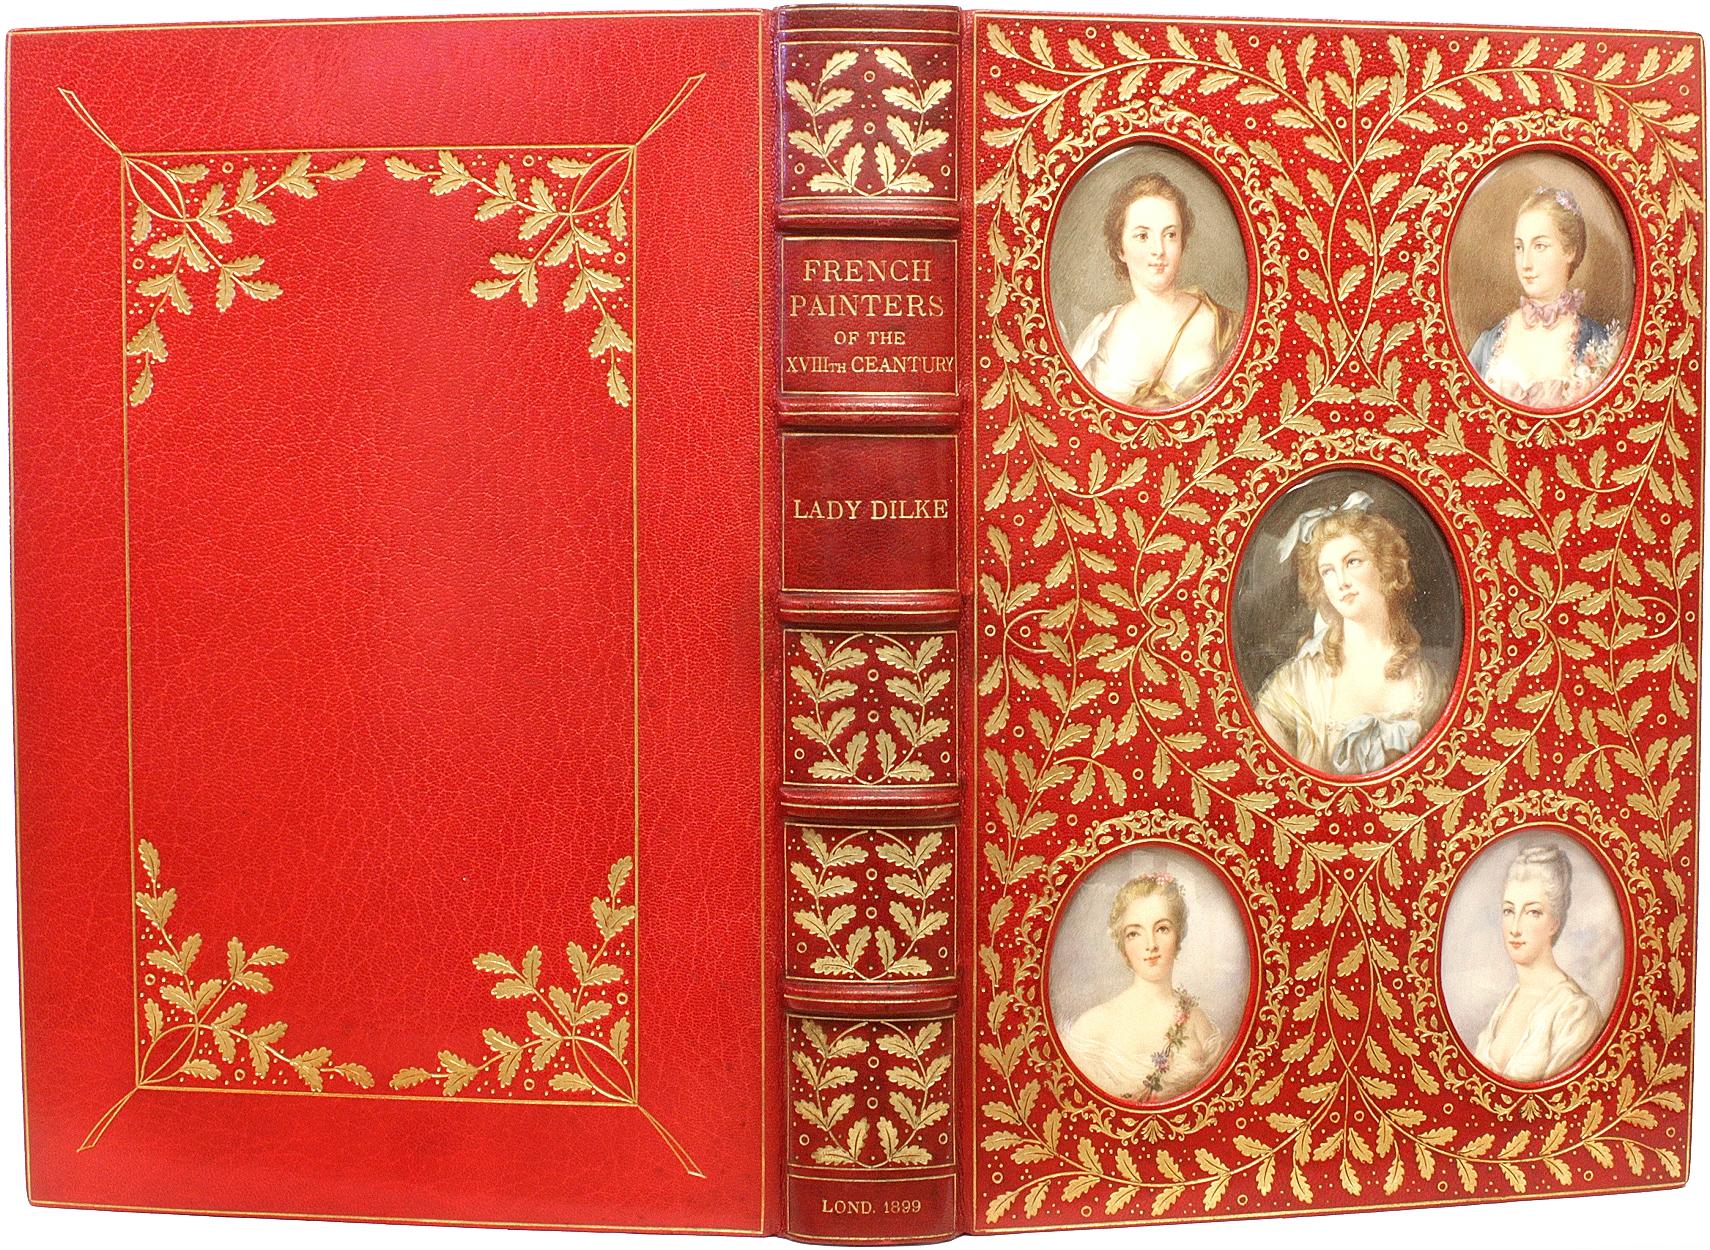 British Dilke, French Painters of the 18th Century, in an Outstanding Cosway Binding